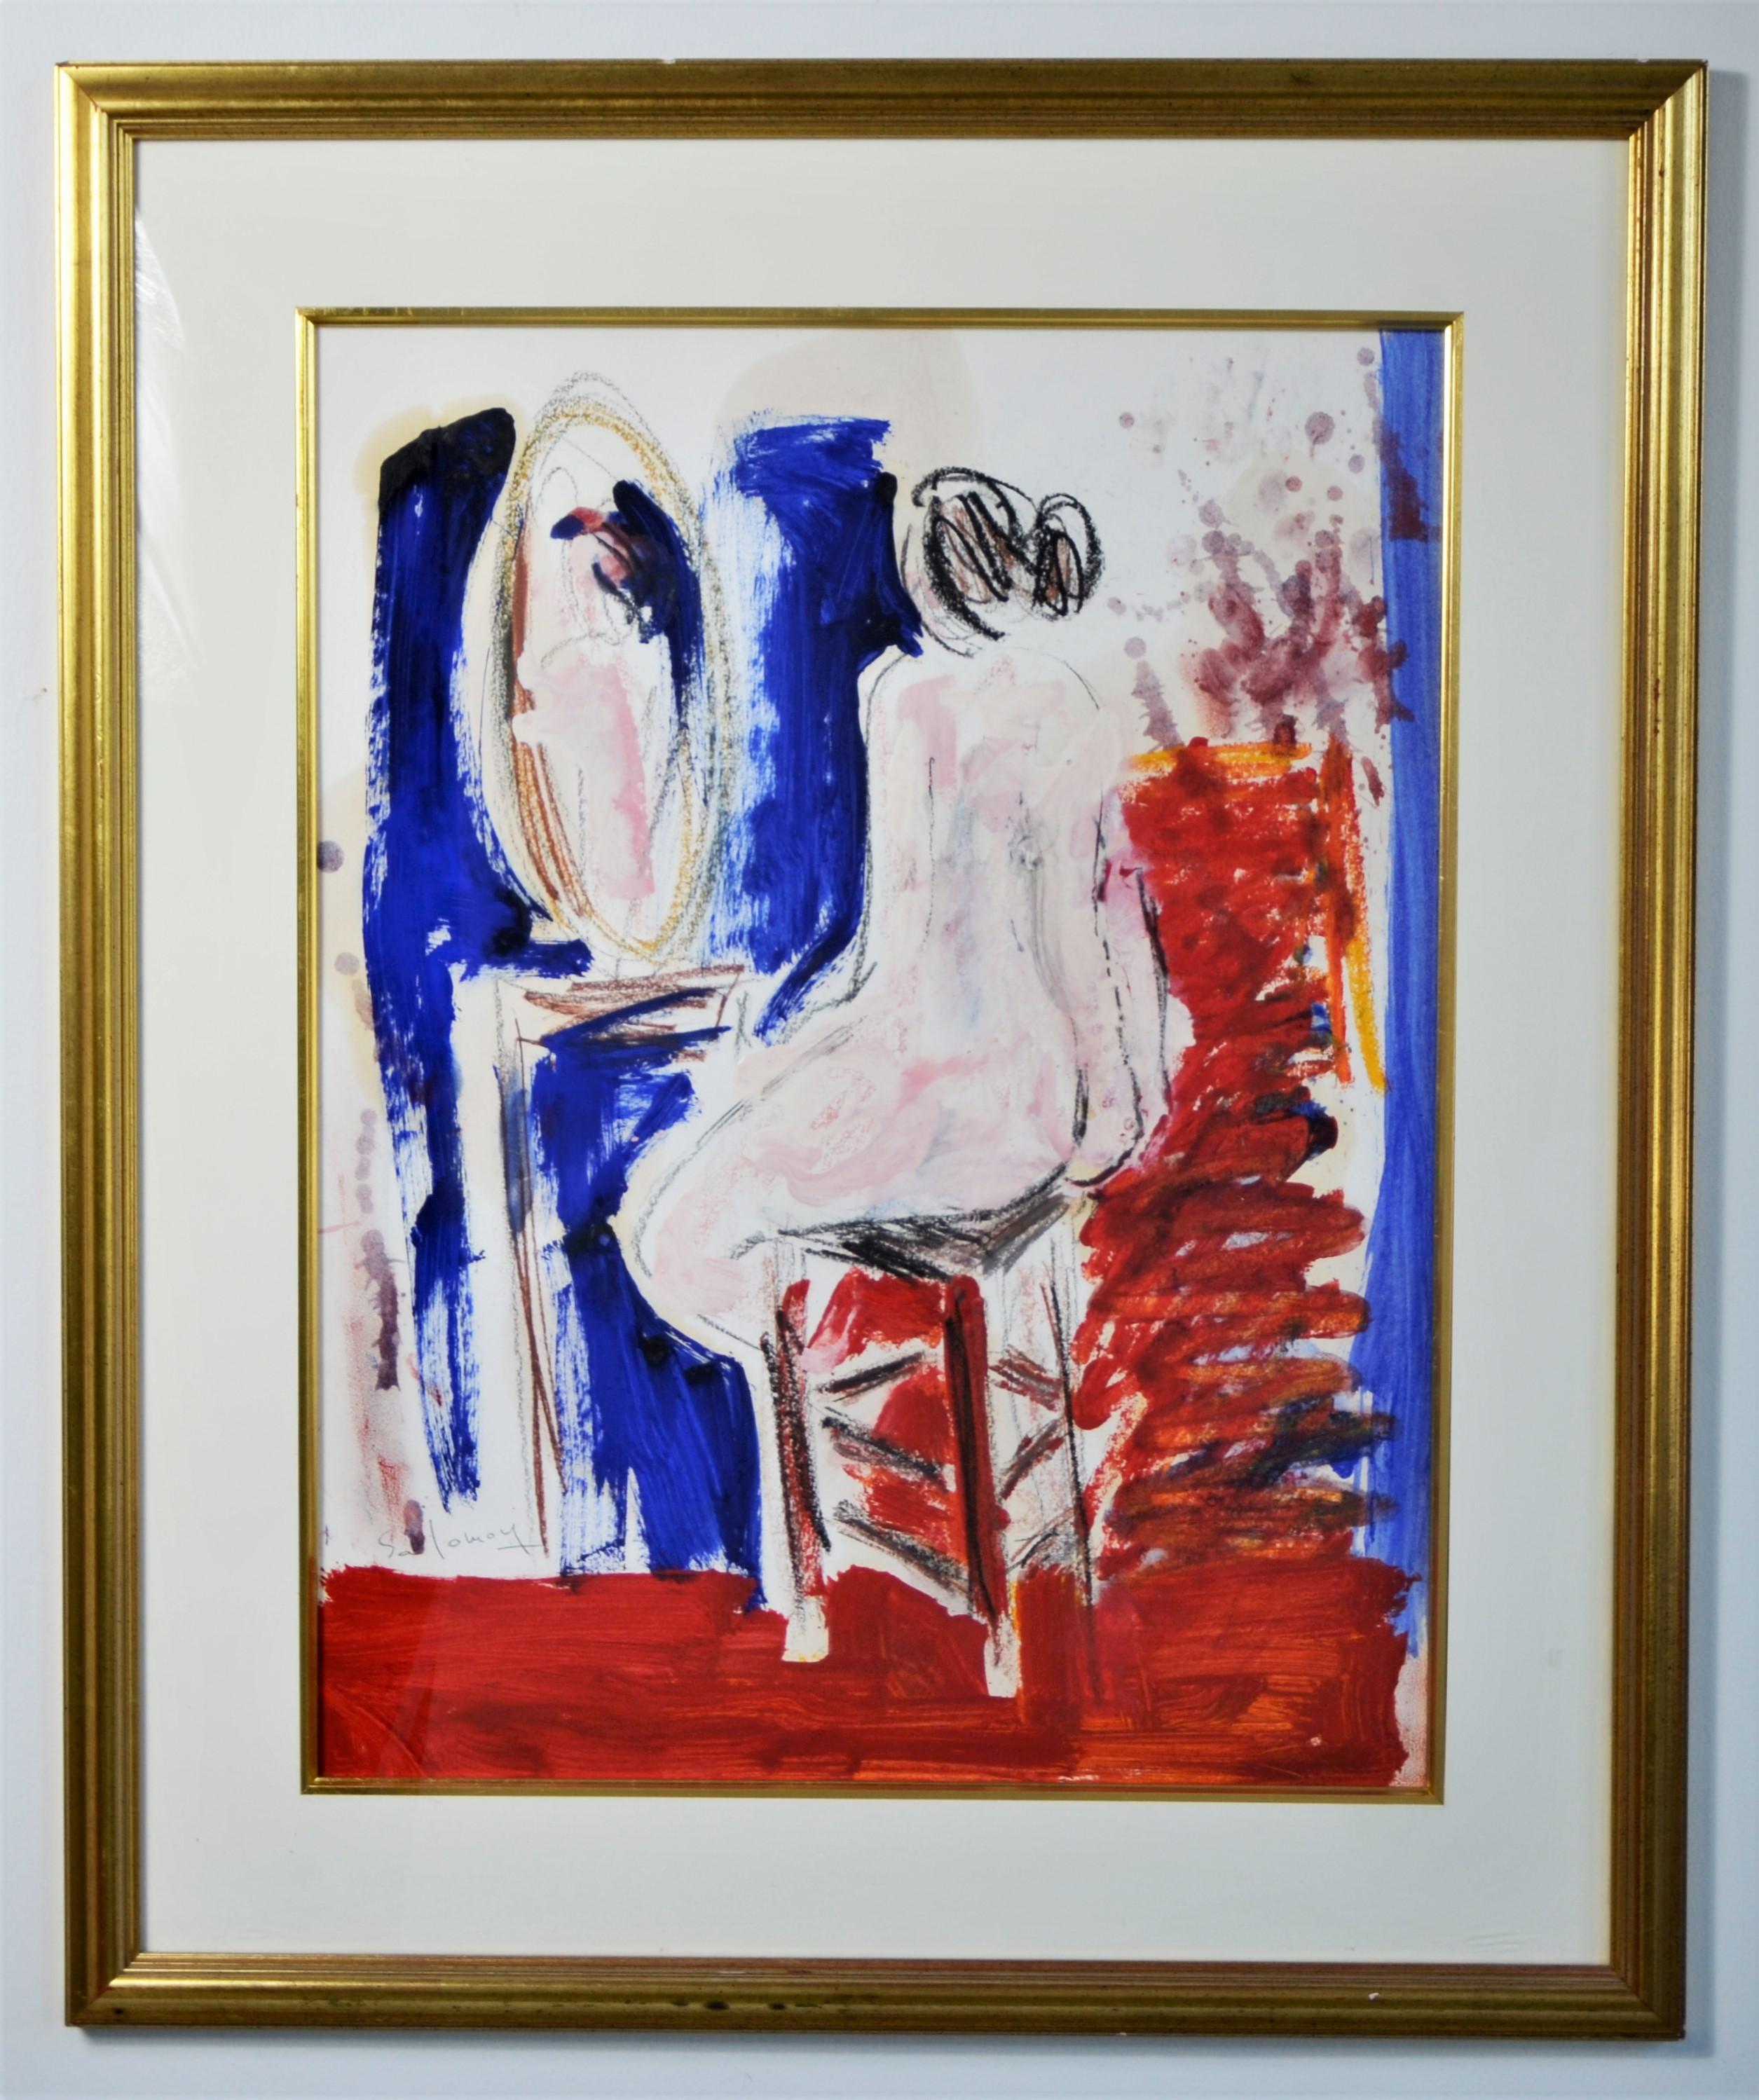 Offered is a late 20th century signed original painting in the expressionist style by JC Salomoy of a female figure at her dressing table. The original work is beautifully painted with the use of charcoal and primarily in reds, blues and black. JC